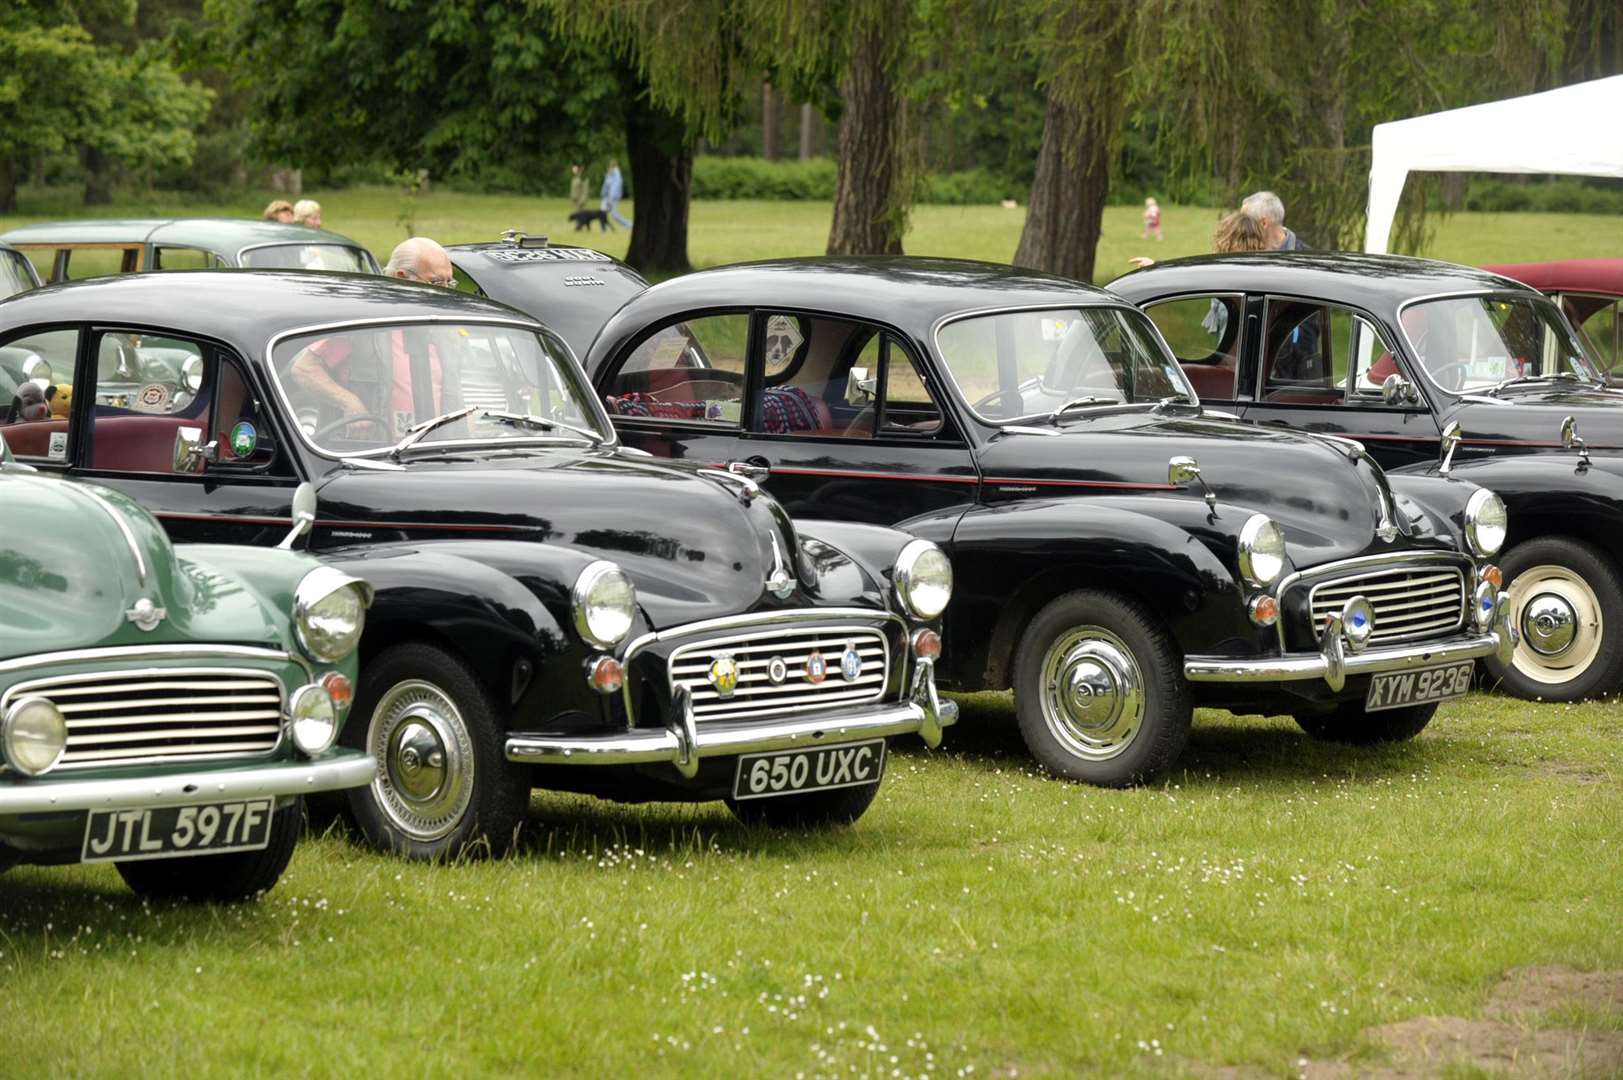 Morris Minors, with 12,000 registered in the UK, are among the older vehicles affected by the arrival of E10 petrol